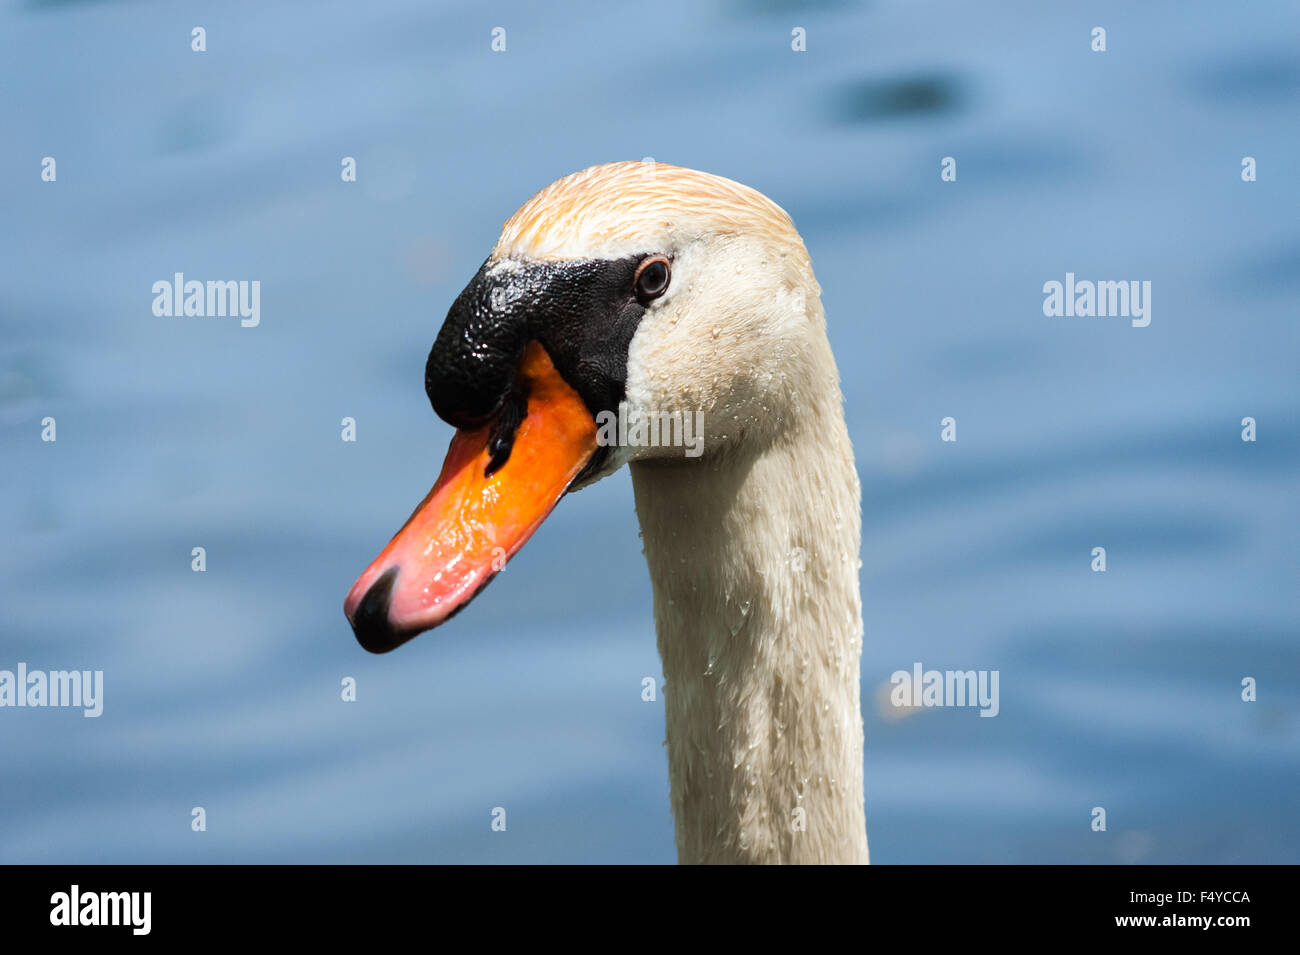 Close-up portrait of wet mute swan head and face with water droplets on feathers, against blurred background. Stock Photo